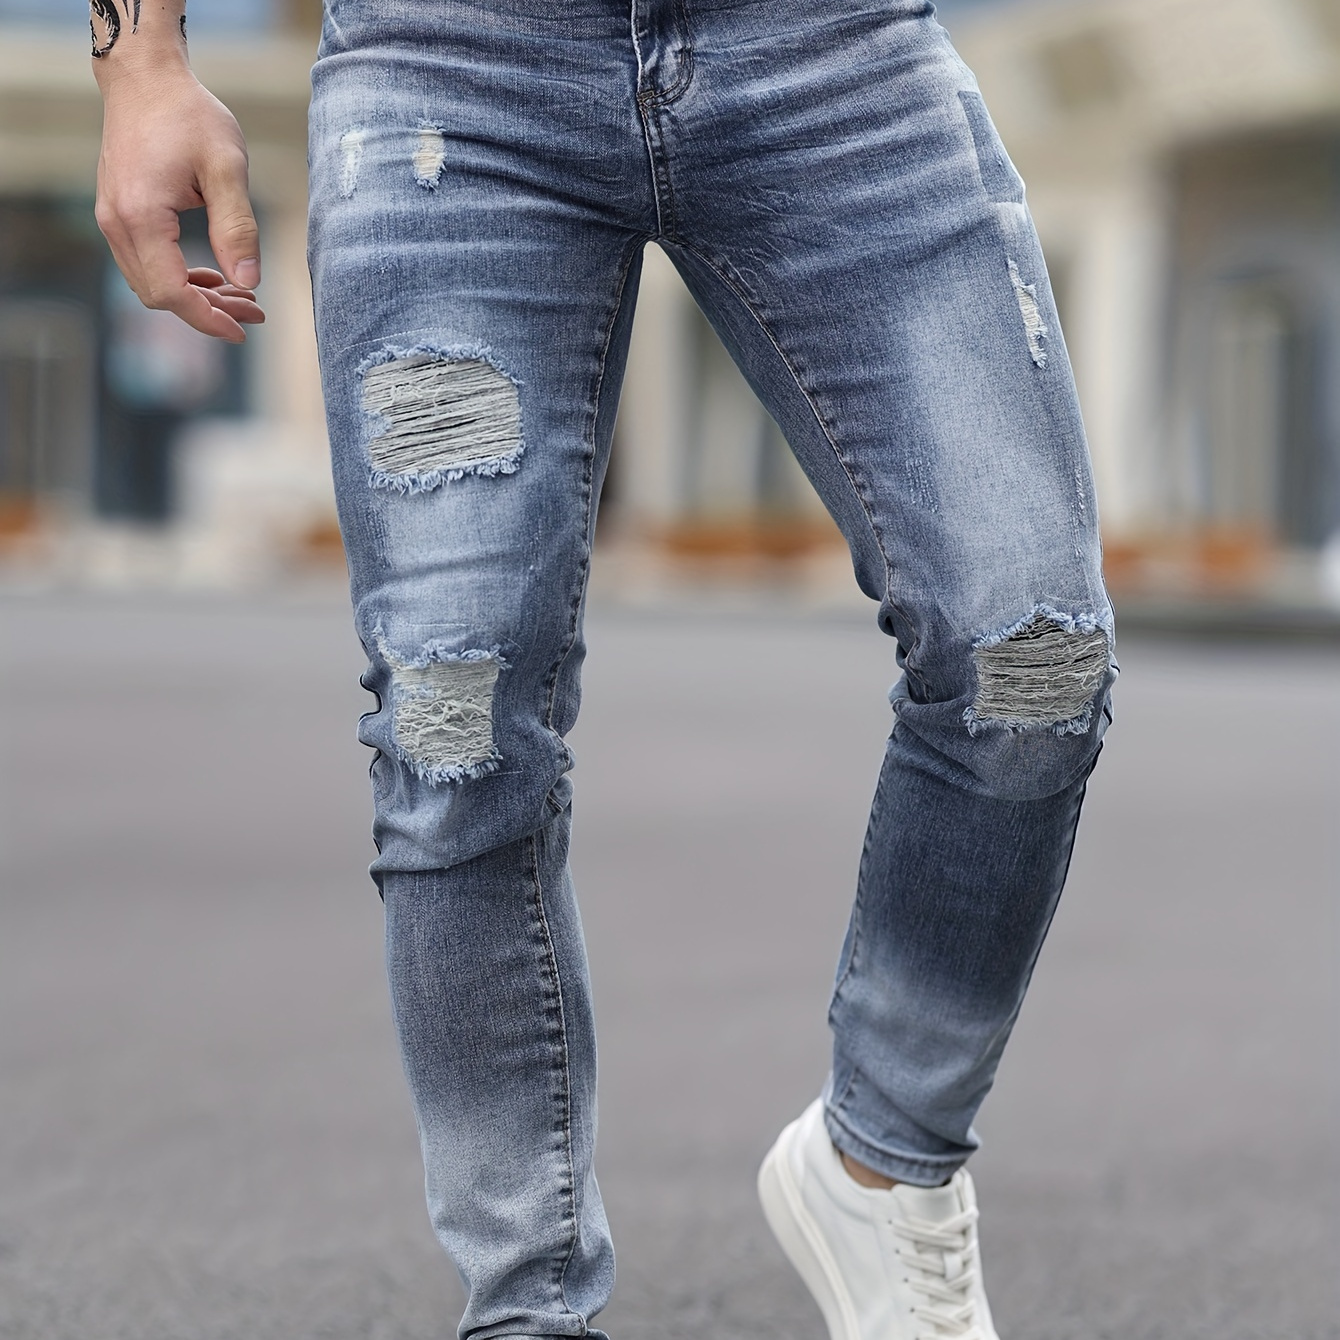 

Men's Fashion Ripped Jeans, Stretch Denim Comfort Fit Casual Pants, Streetwear Style, Washed Blue Distressed Trousers For Men